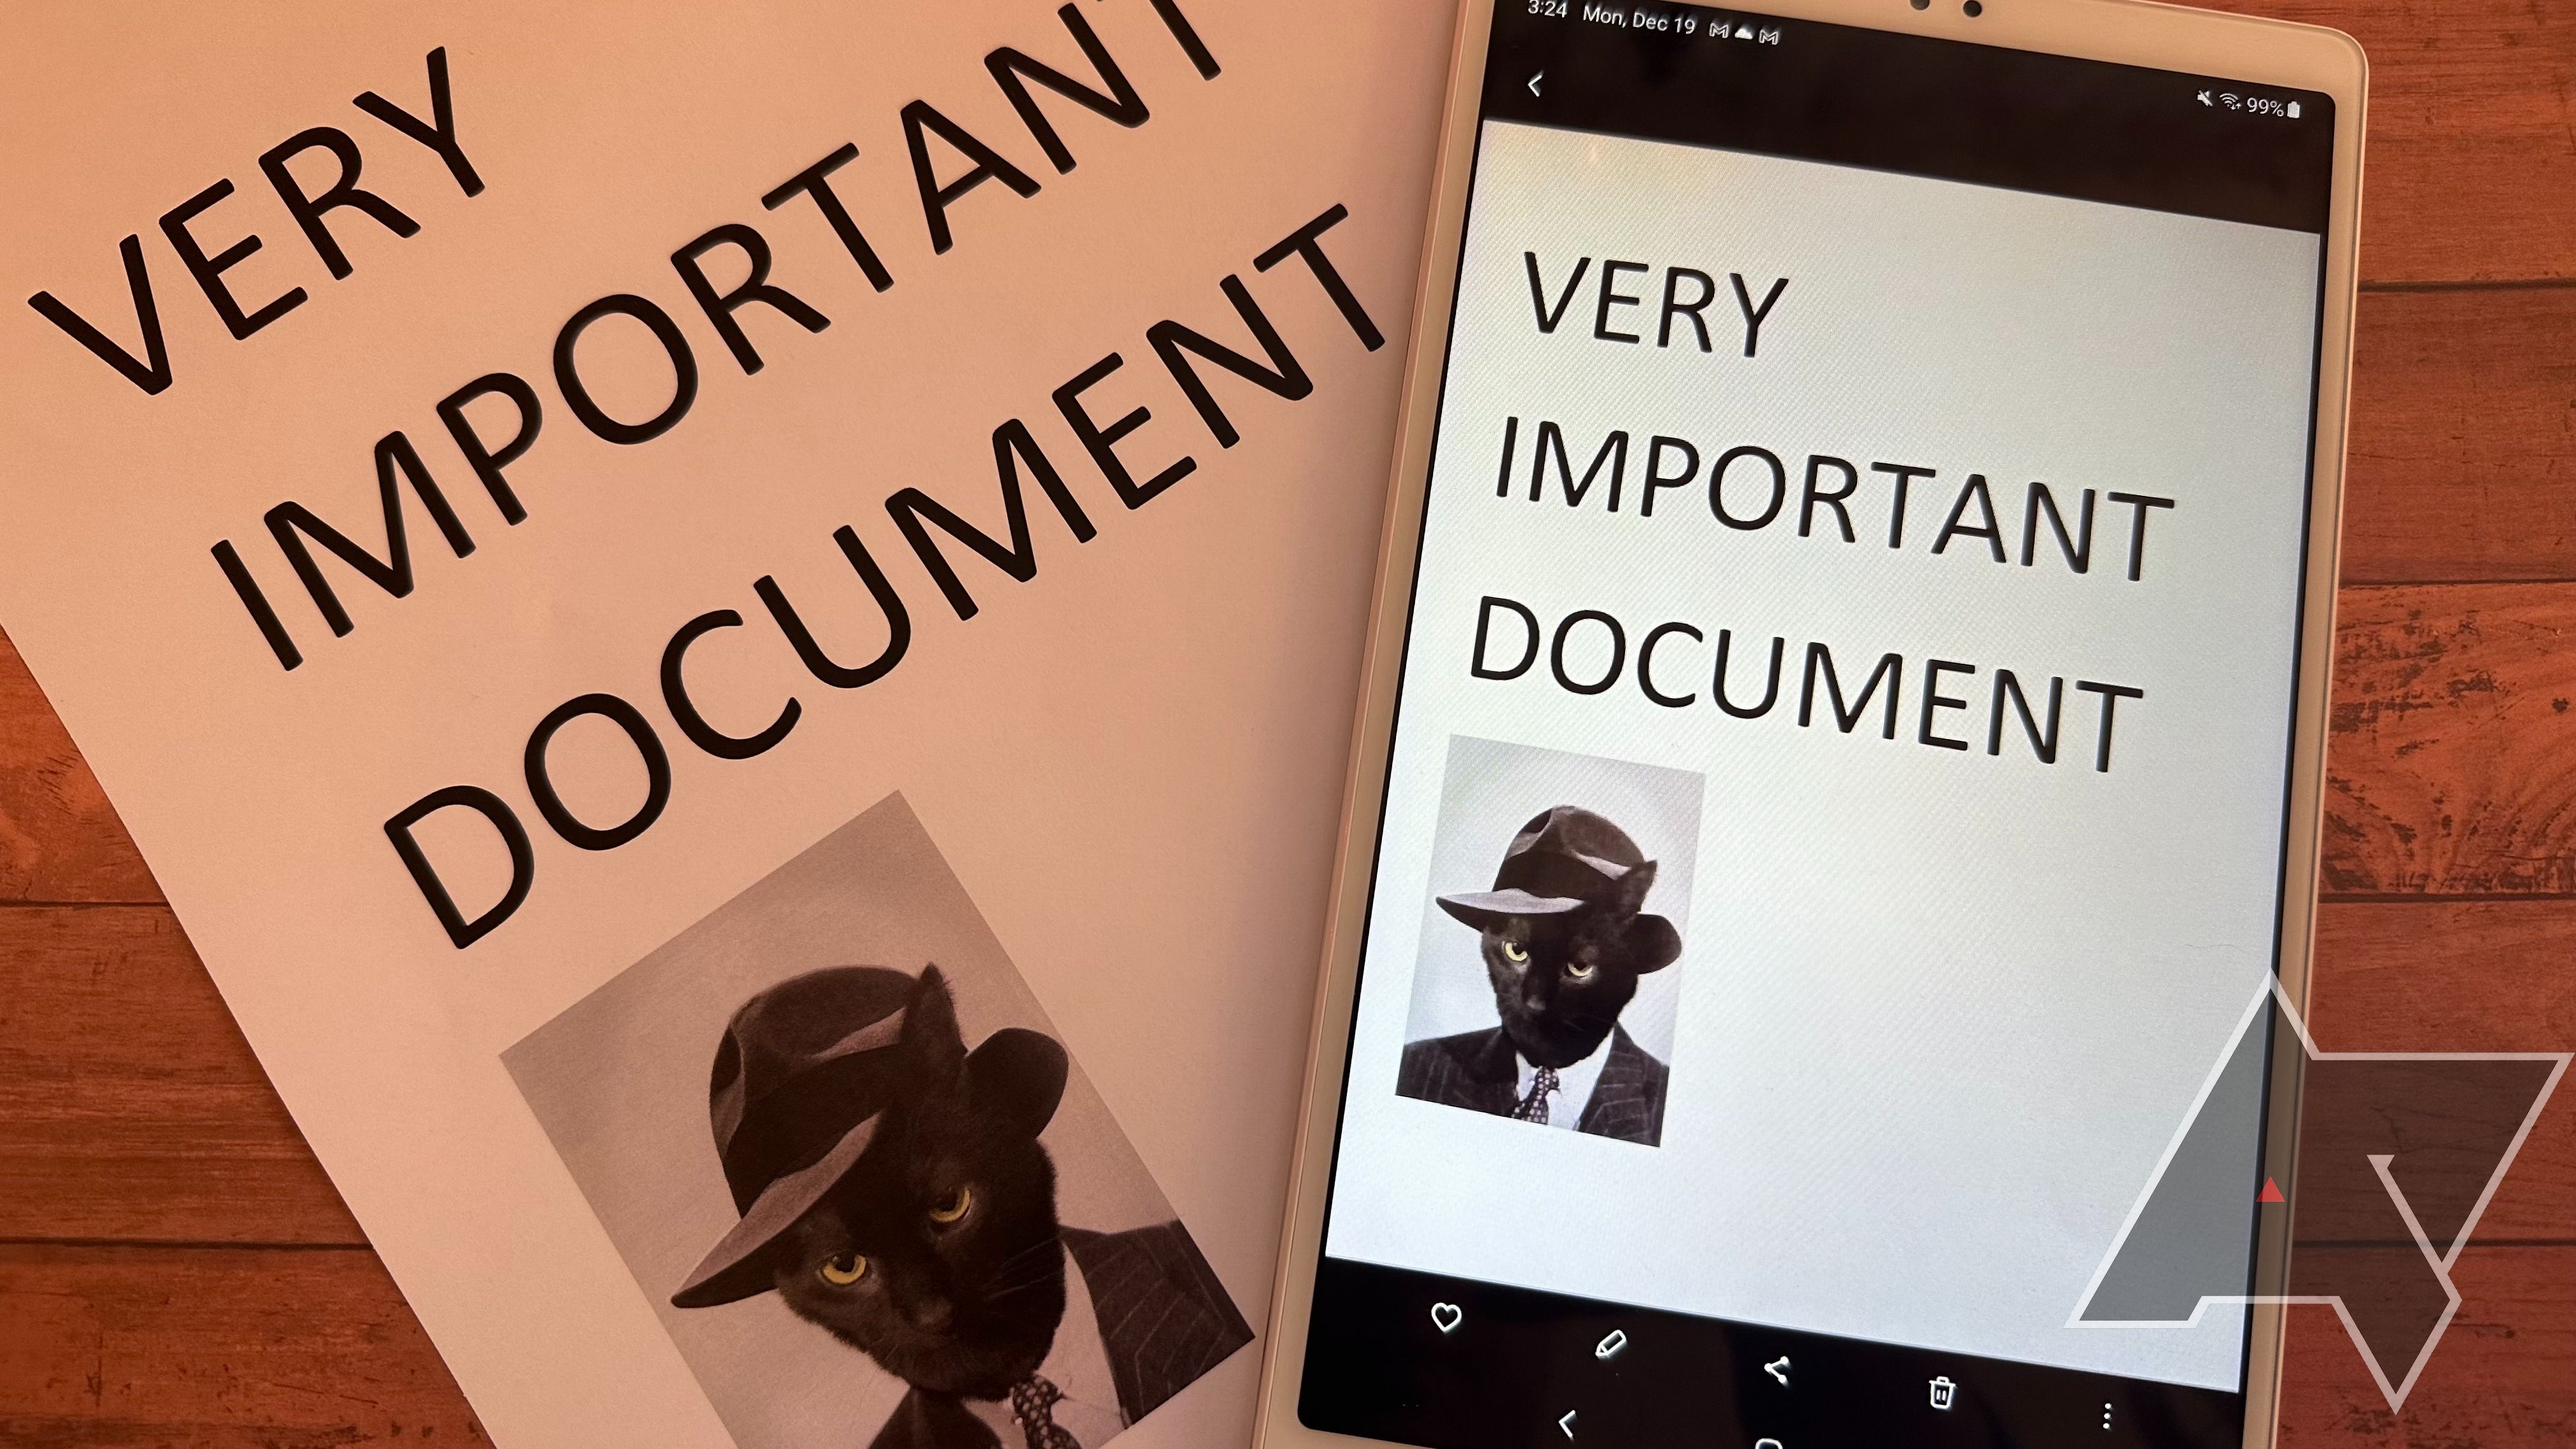 Example of document scanning on the Samsung Galaxy A7 lite